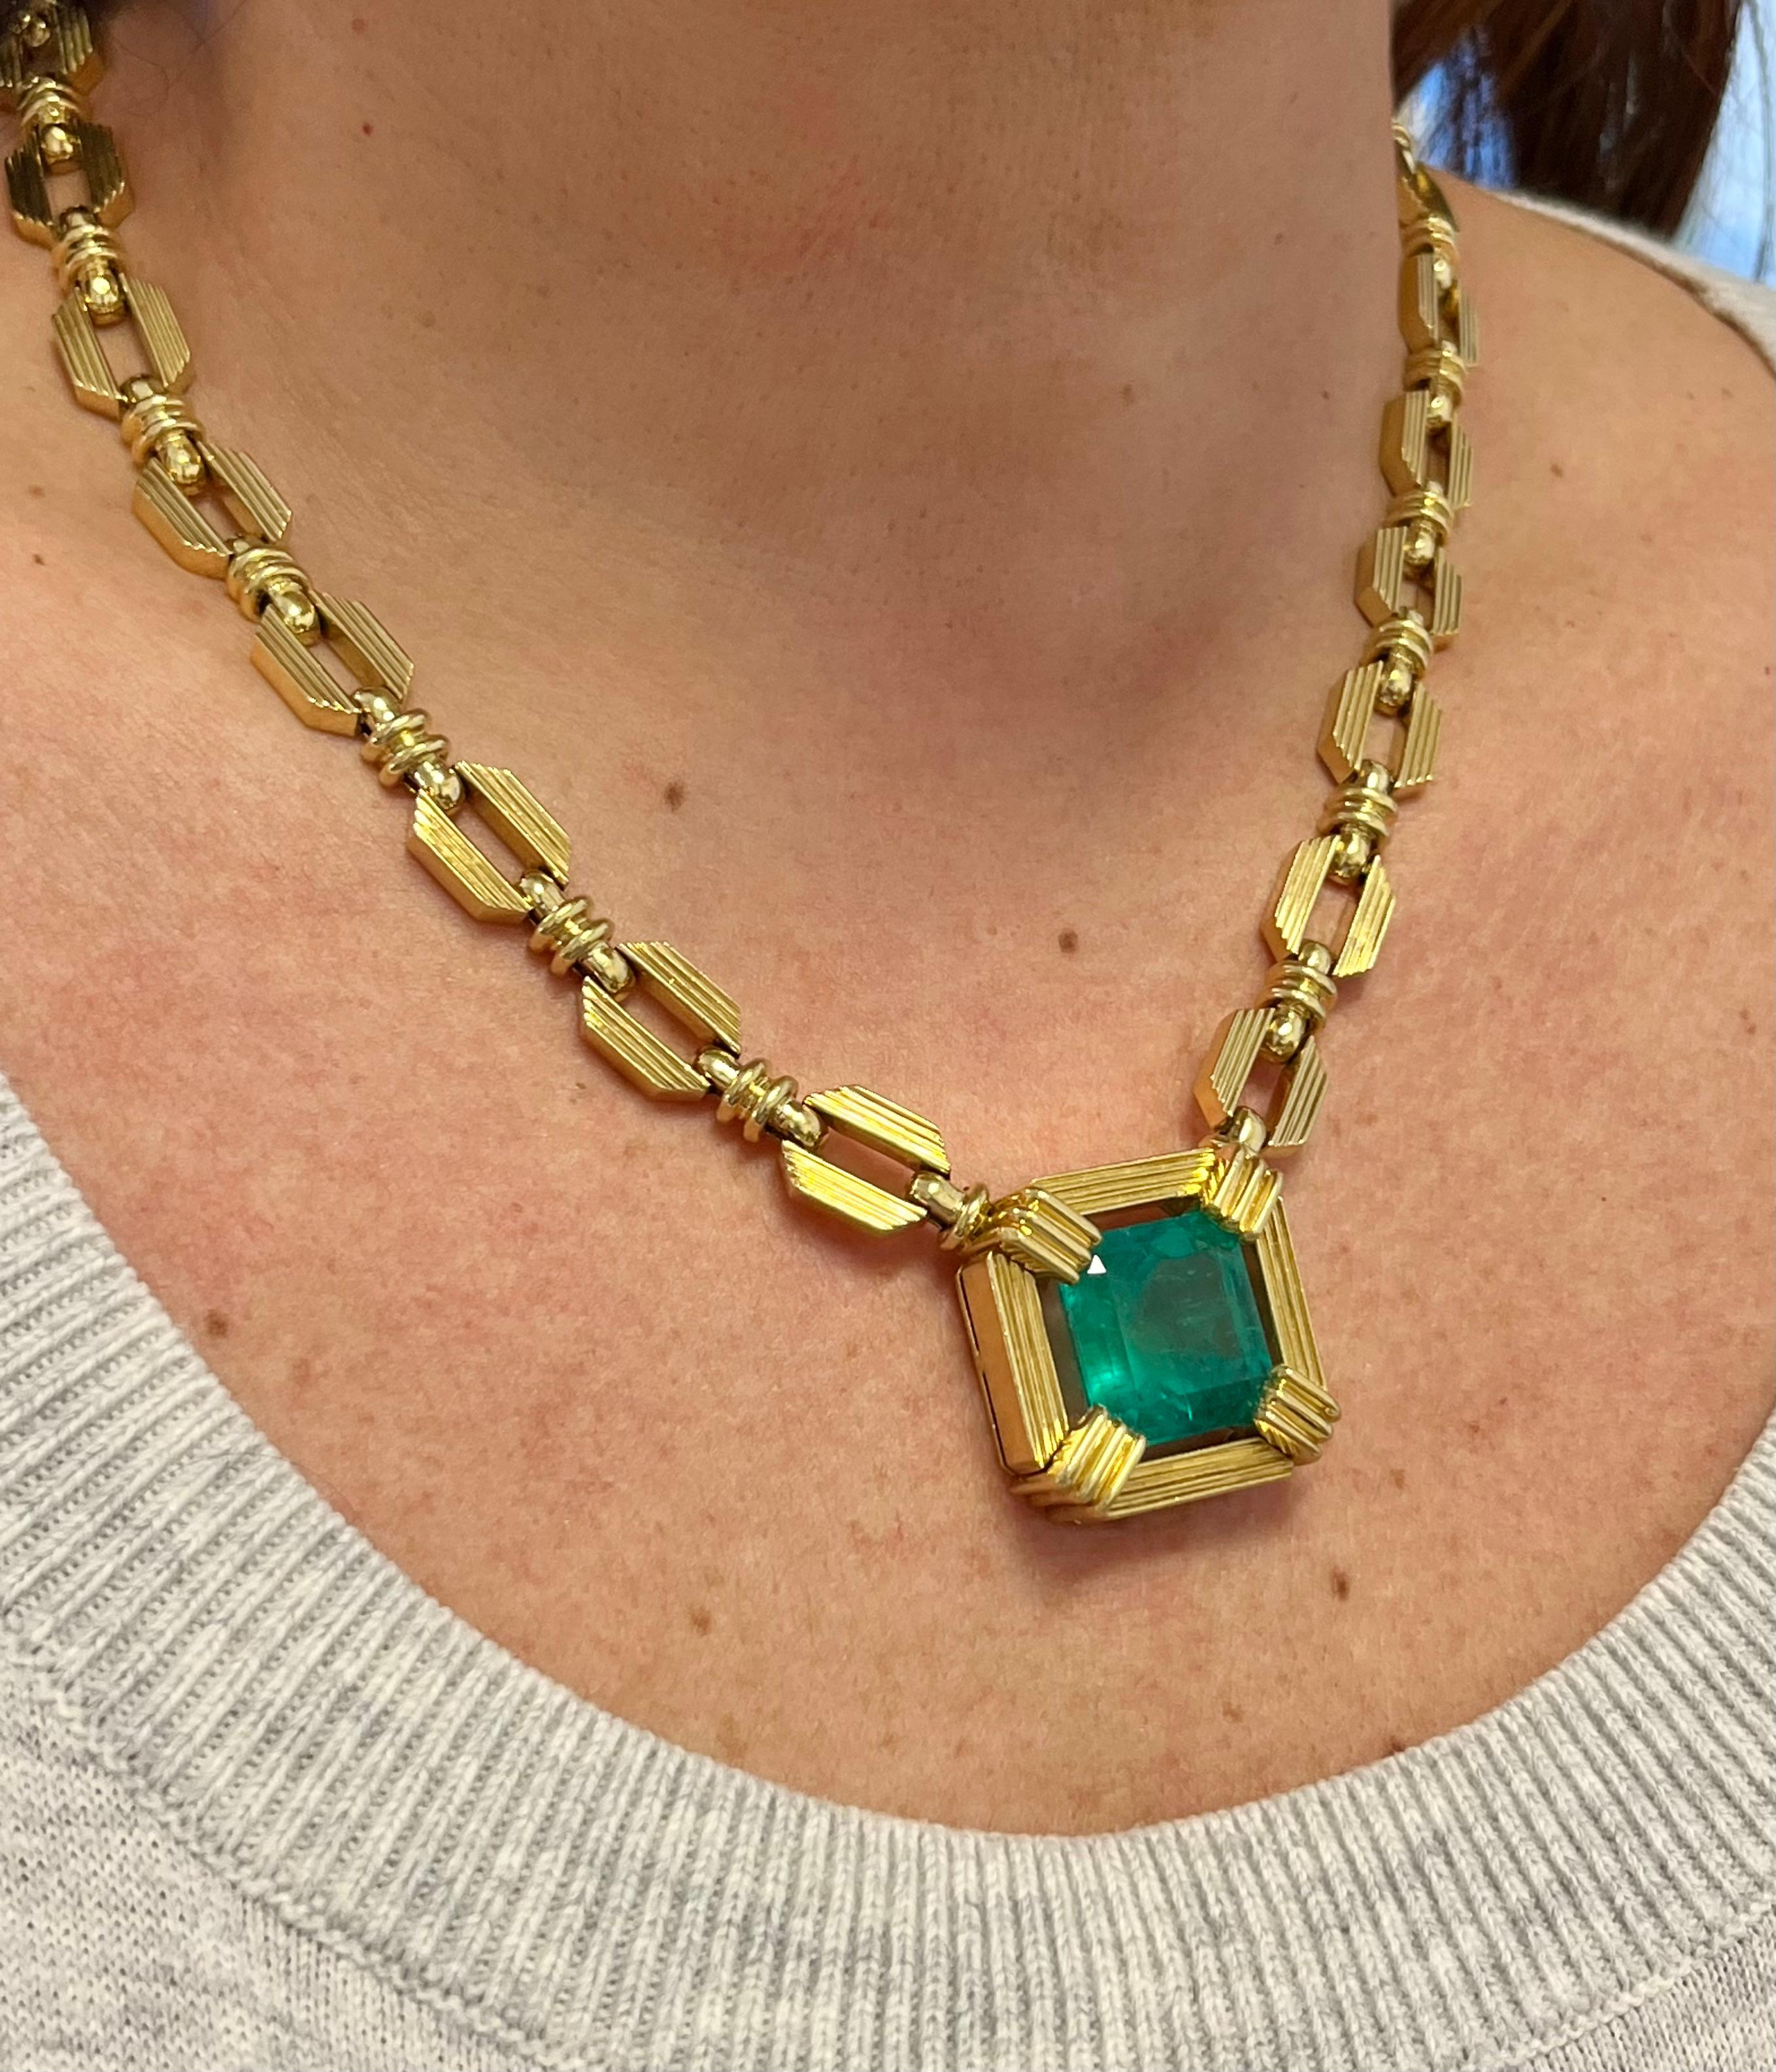 Henry Dunay Signed 19.48 Carat Colombian Emerald Necklace in 18k Yellow Gold For Sale 3